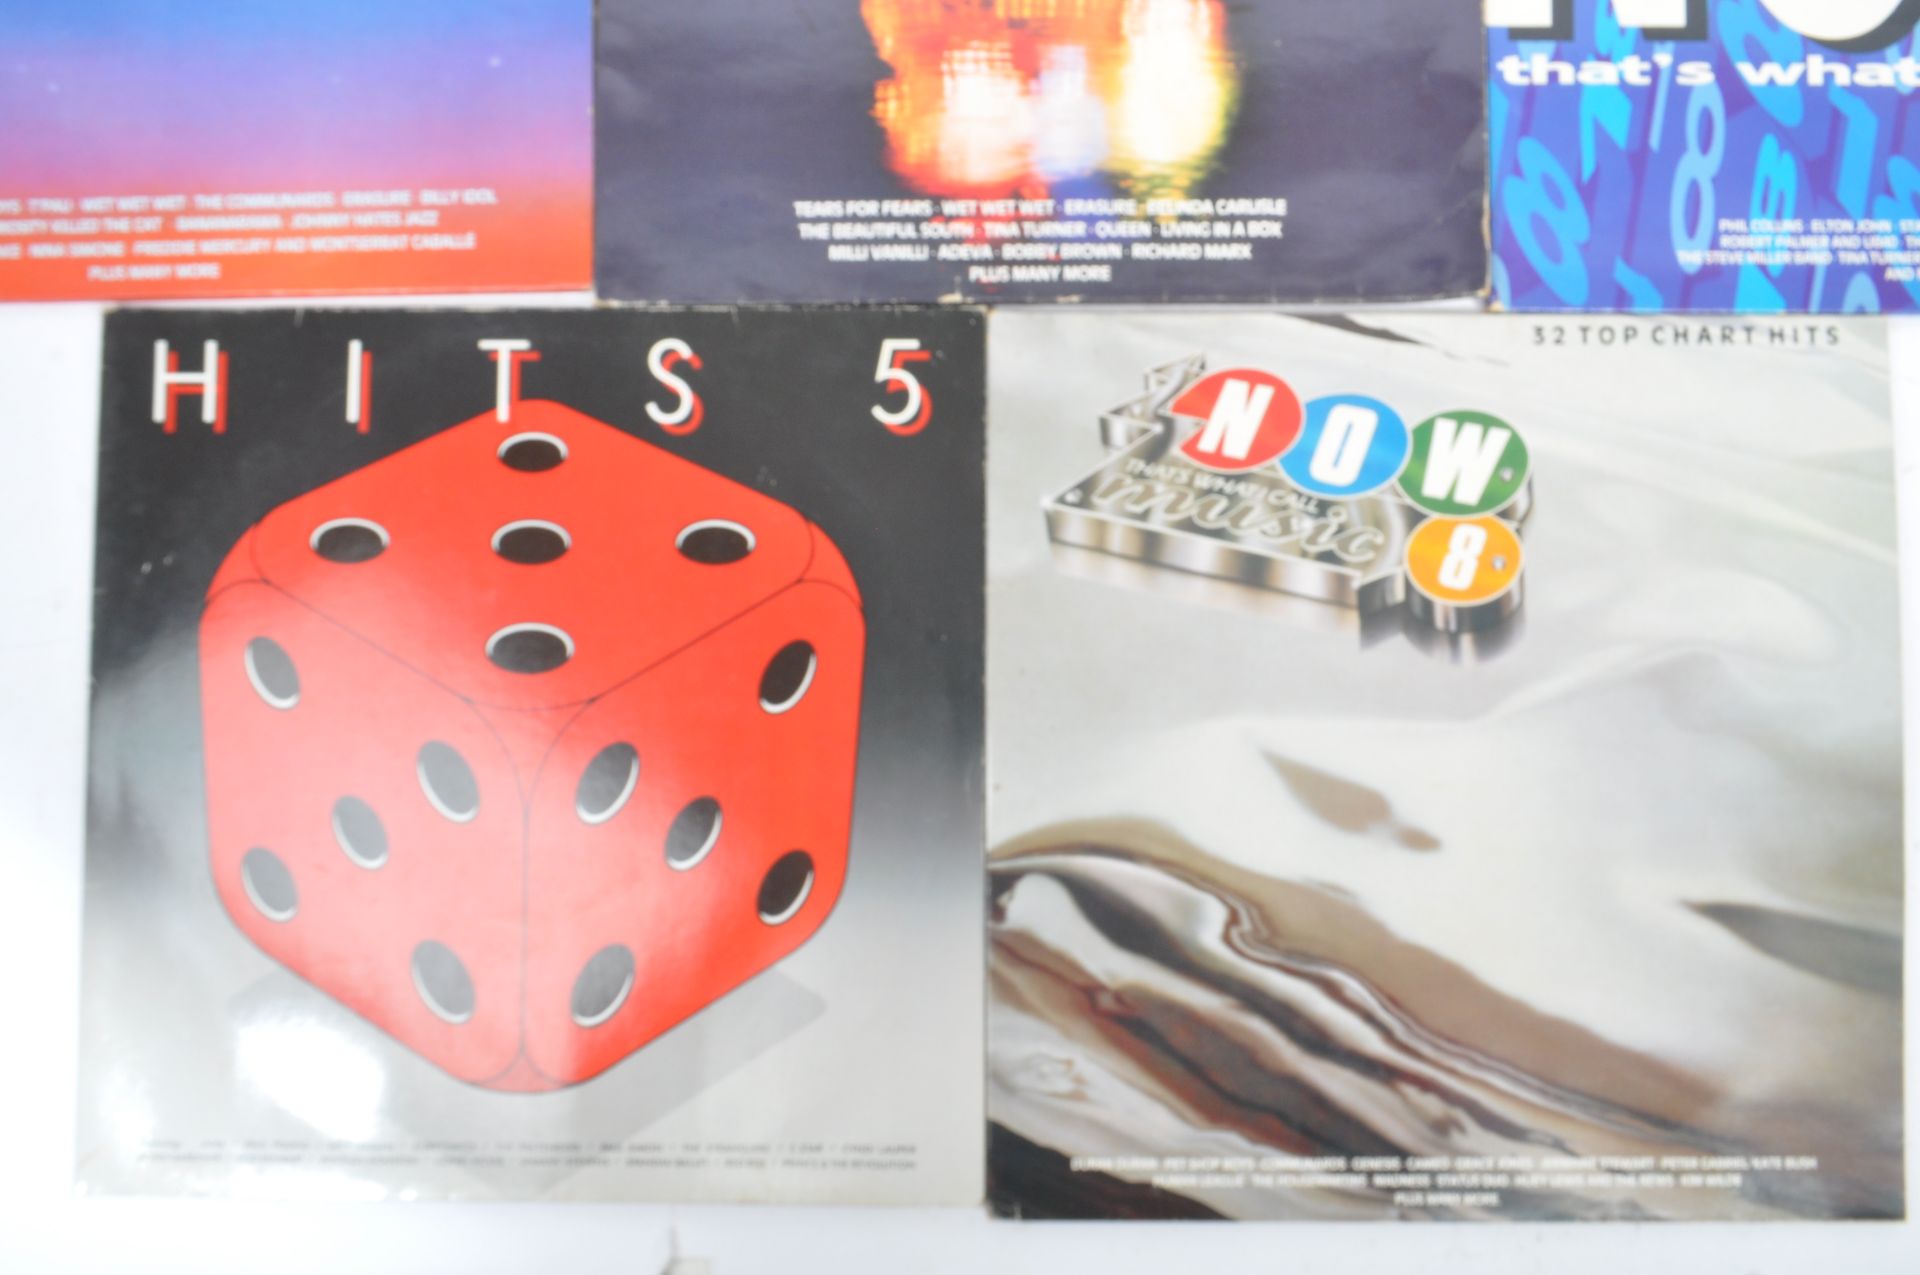 COLLECTION OF NOW THATS WHAT I CALL MUSIC VINYL ALBUM RECORDS - Bild 5 aus 9